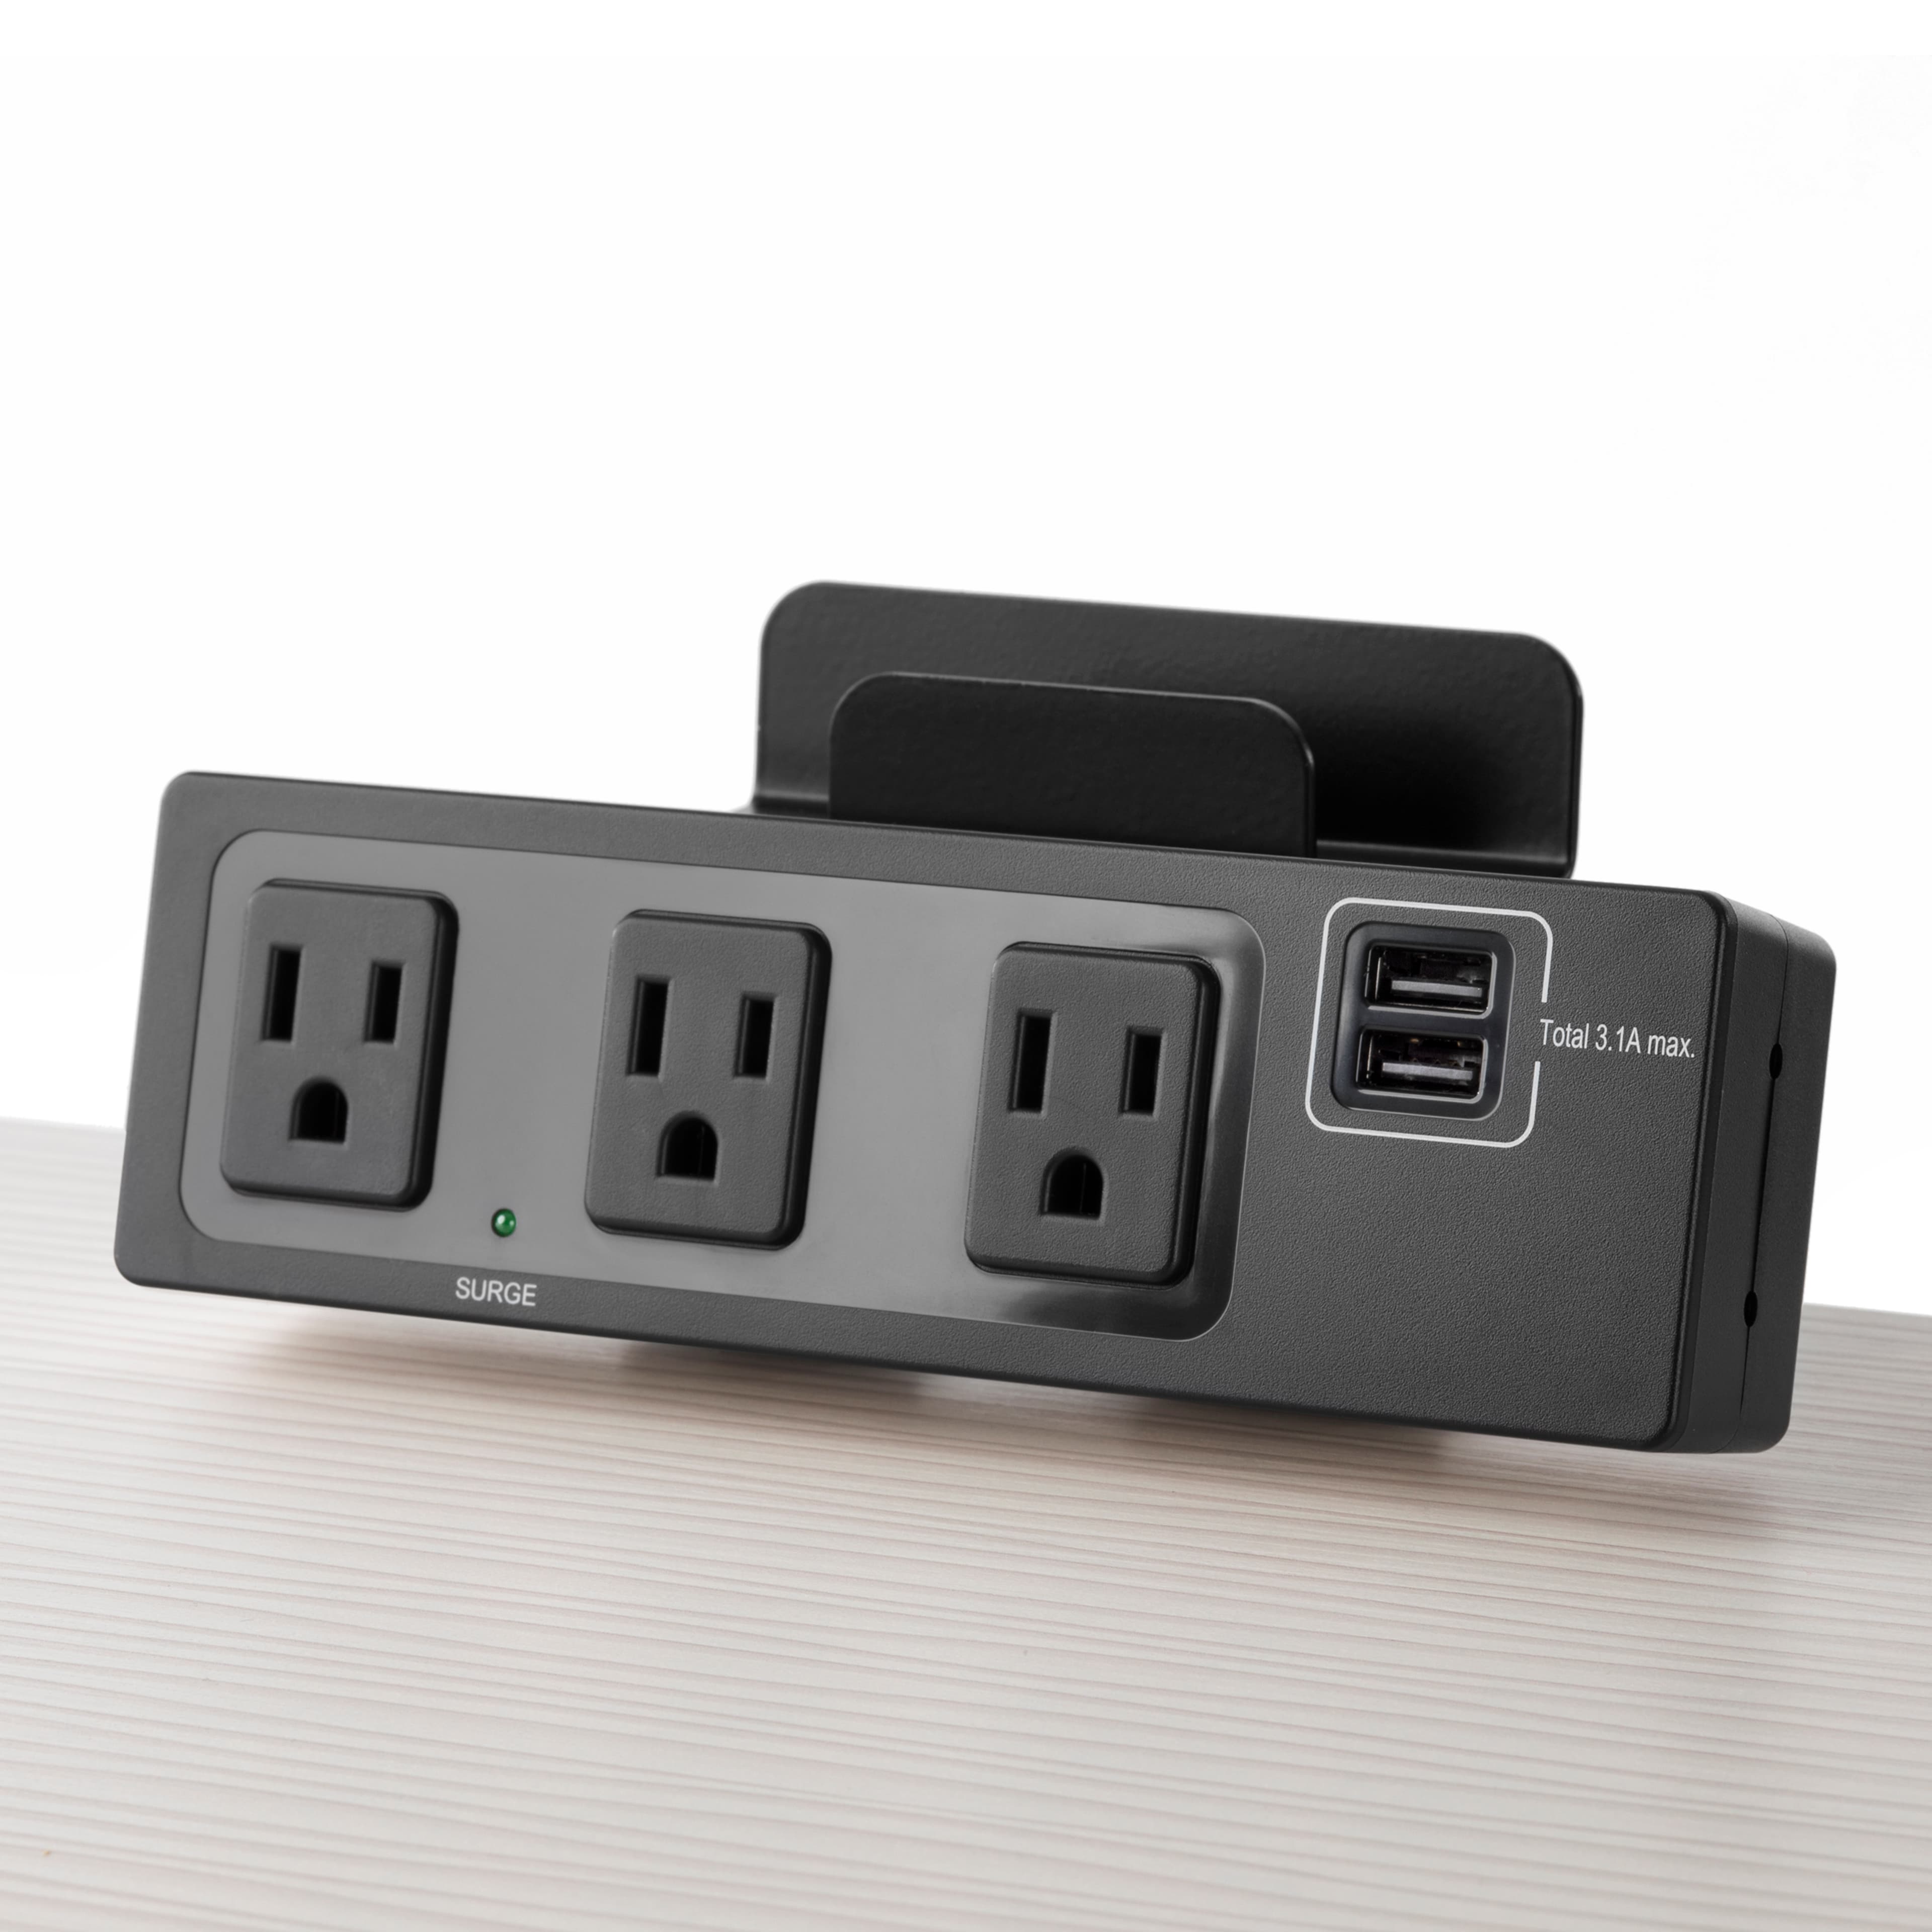 SitOnIt Seating, Accessories, Symmetry's Current power unit features 3 outlets, 2 USB ports, 10 foot power cord, and is